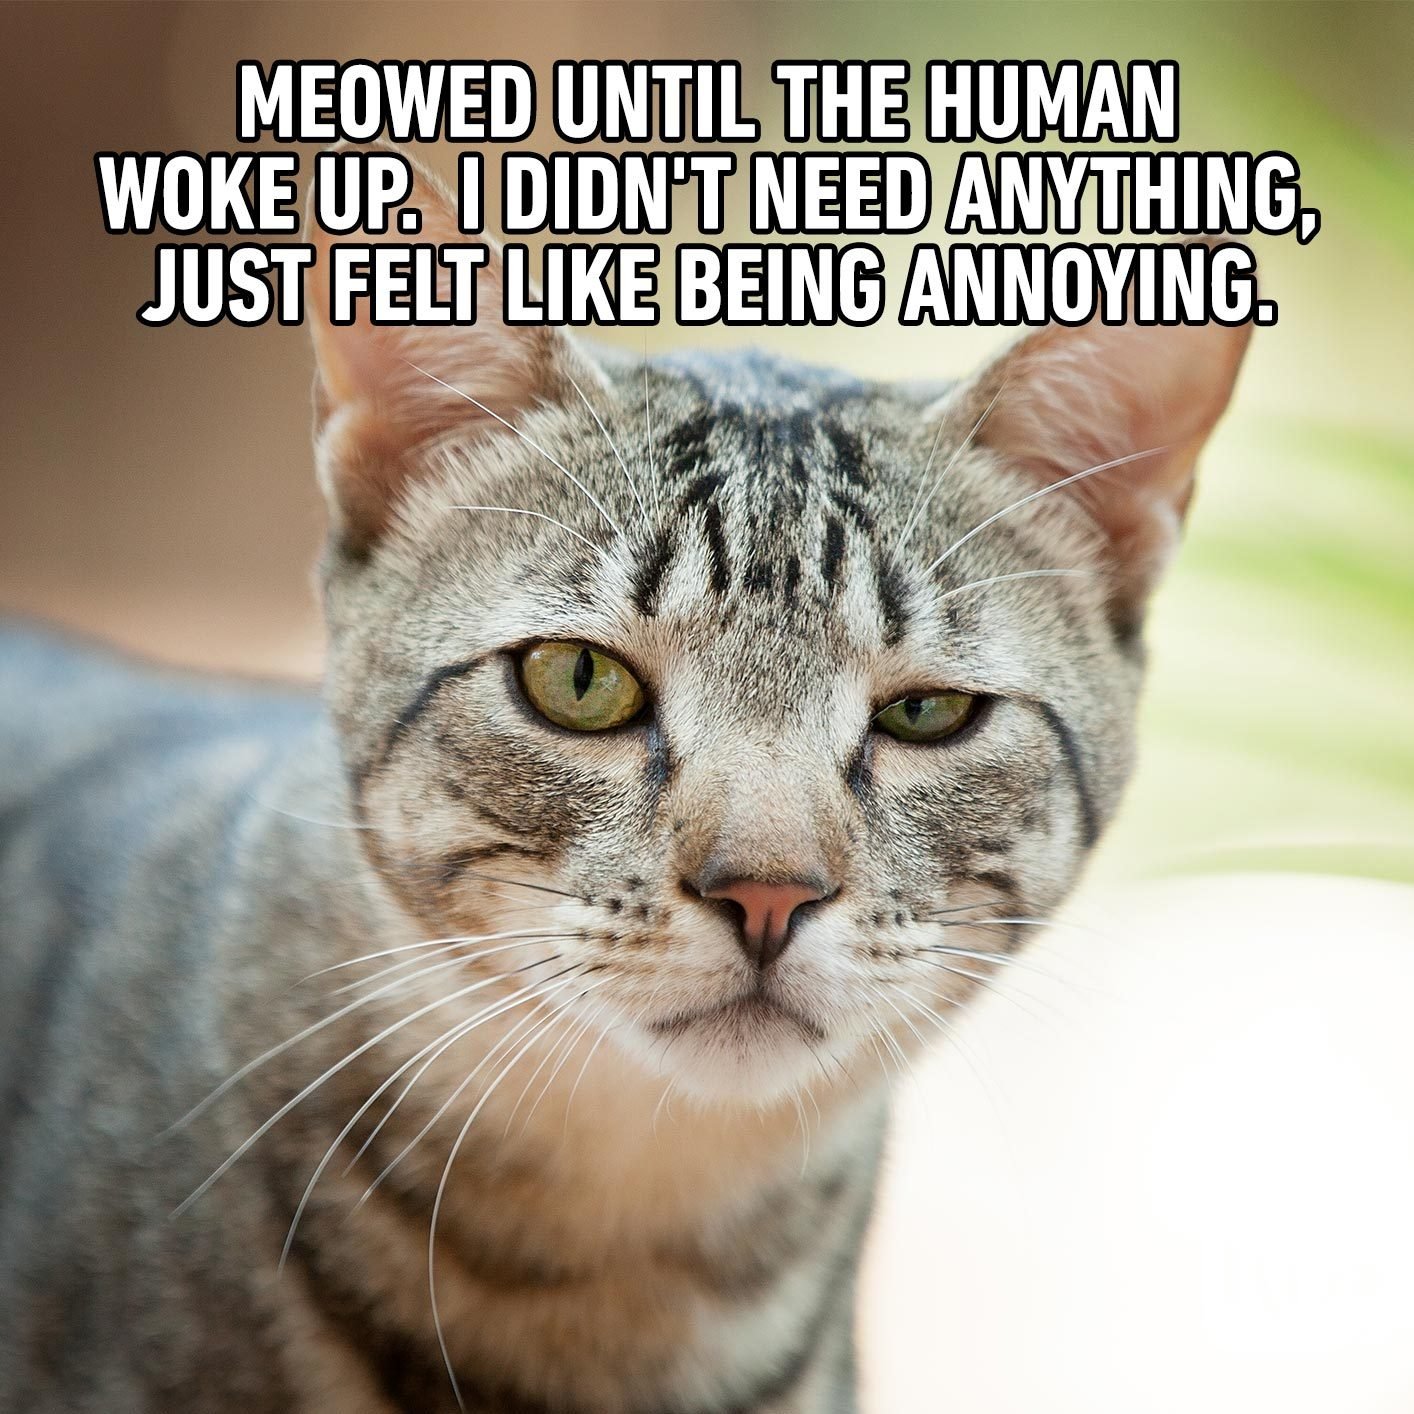 45 Cat Memes You'll Laugh at Every Time Reader's Digest